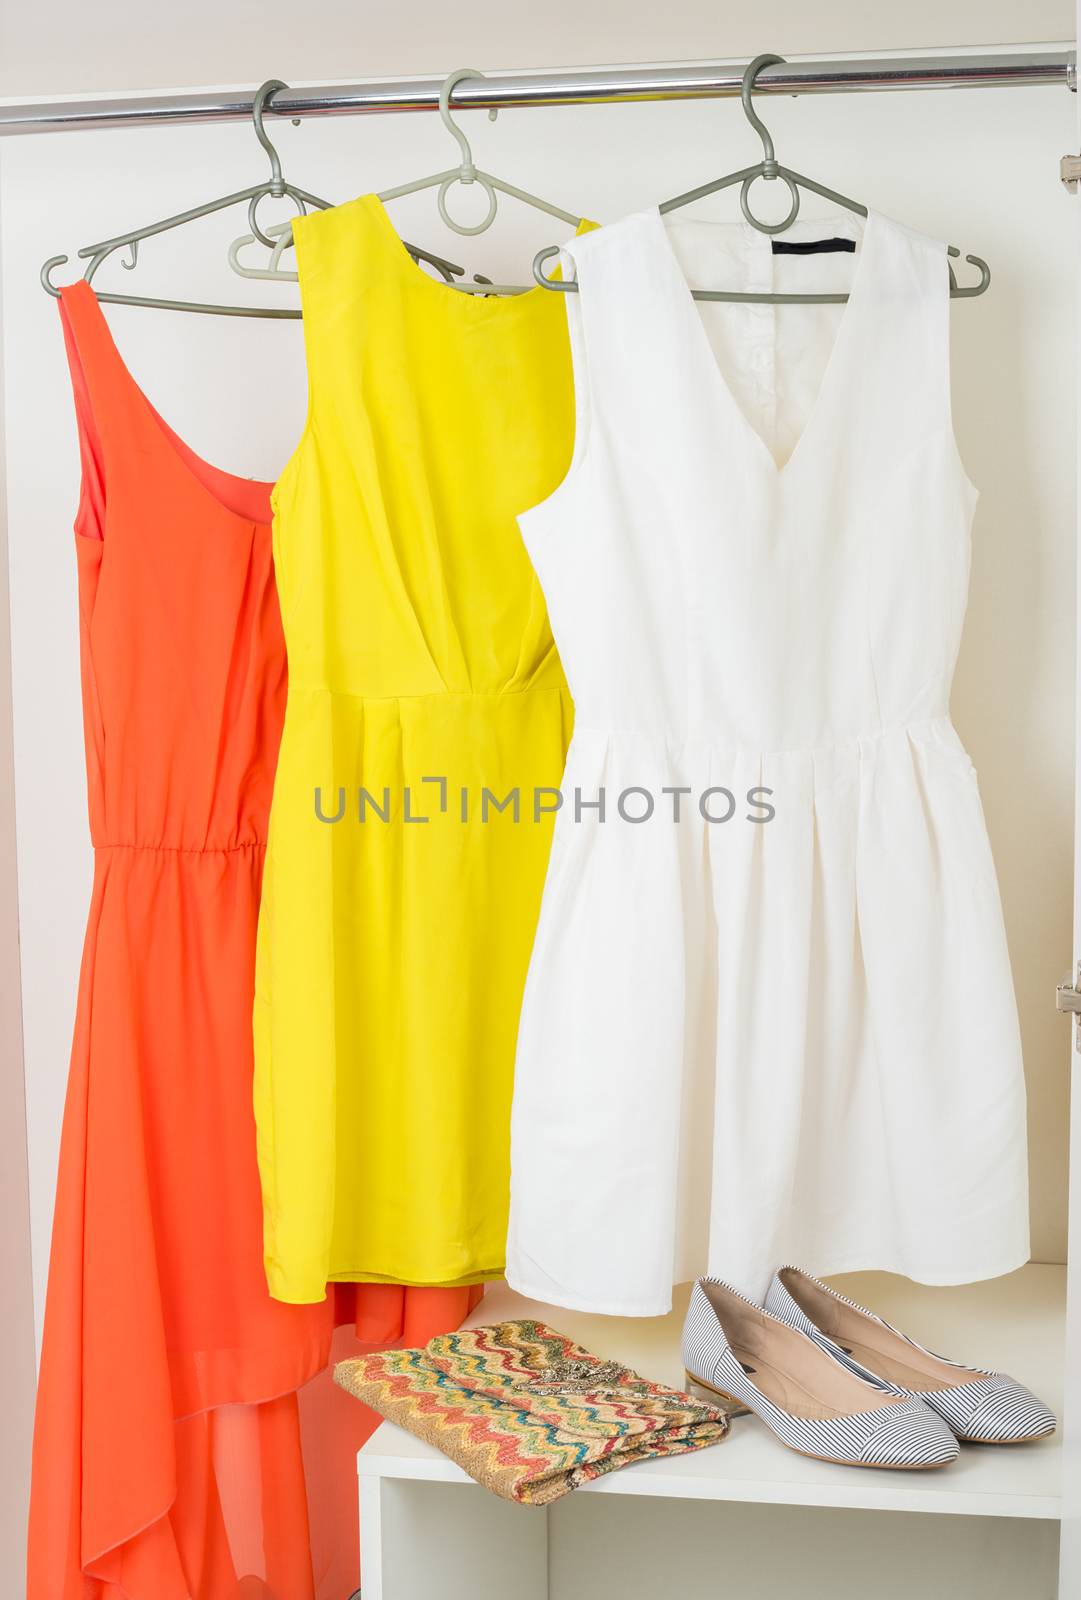 row of  bright colorful female dresses hanging on coat hanger, shoes and handbag in white wardrobe